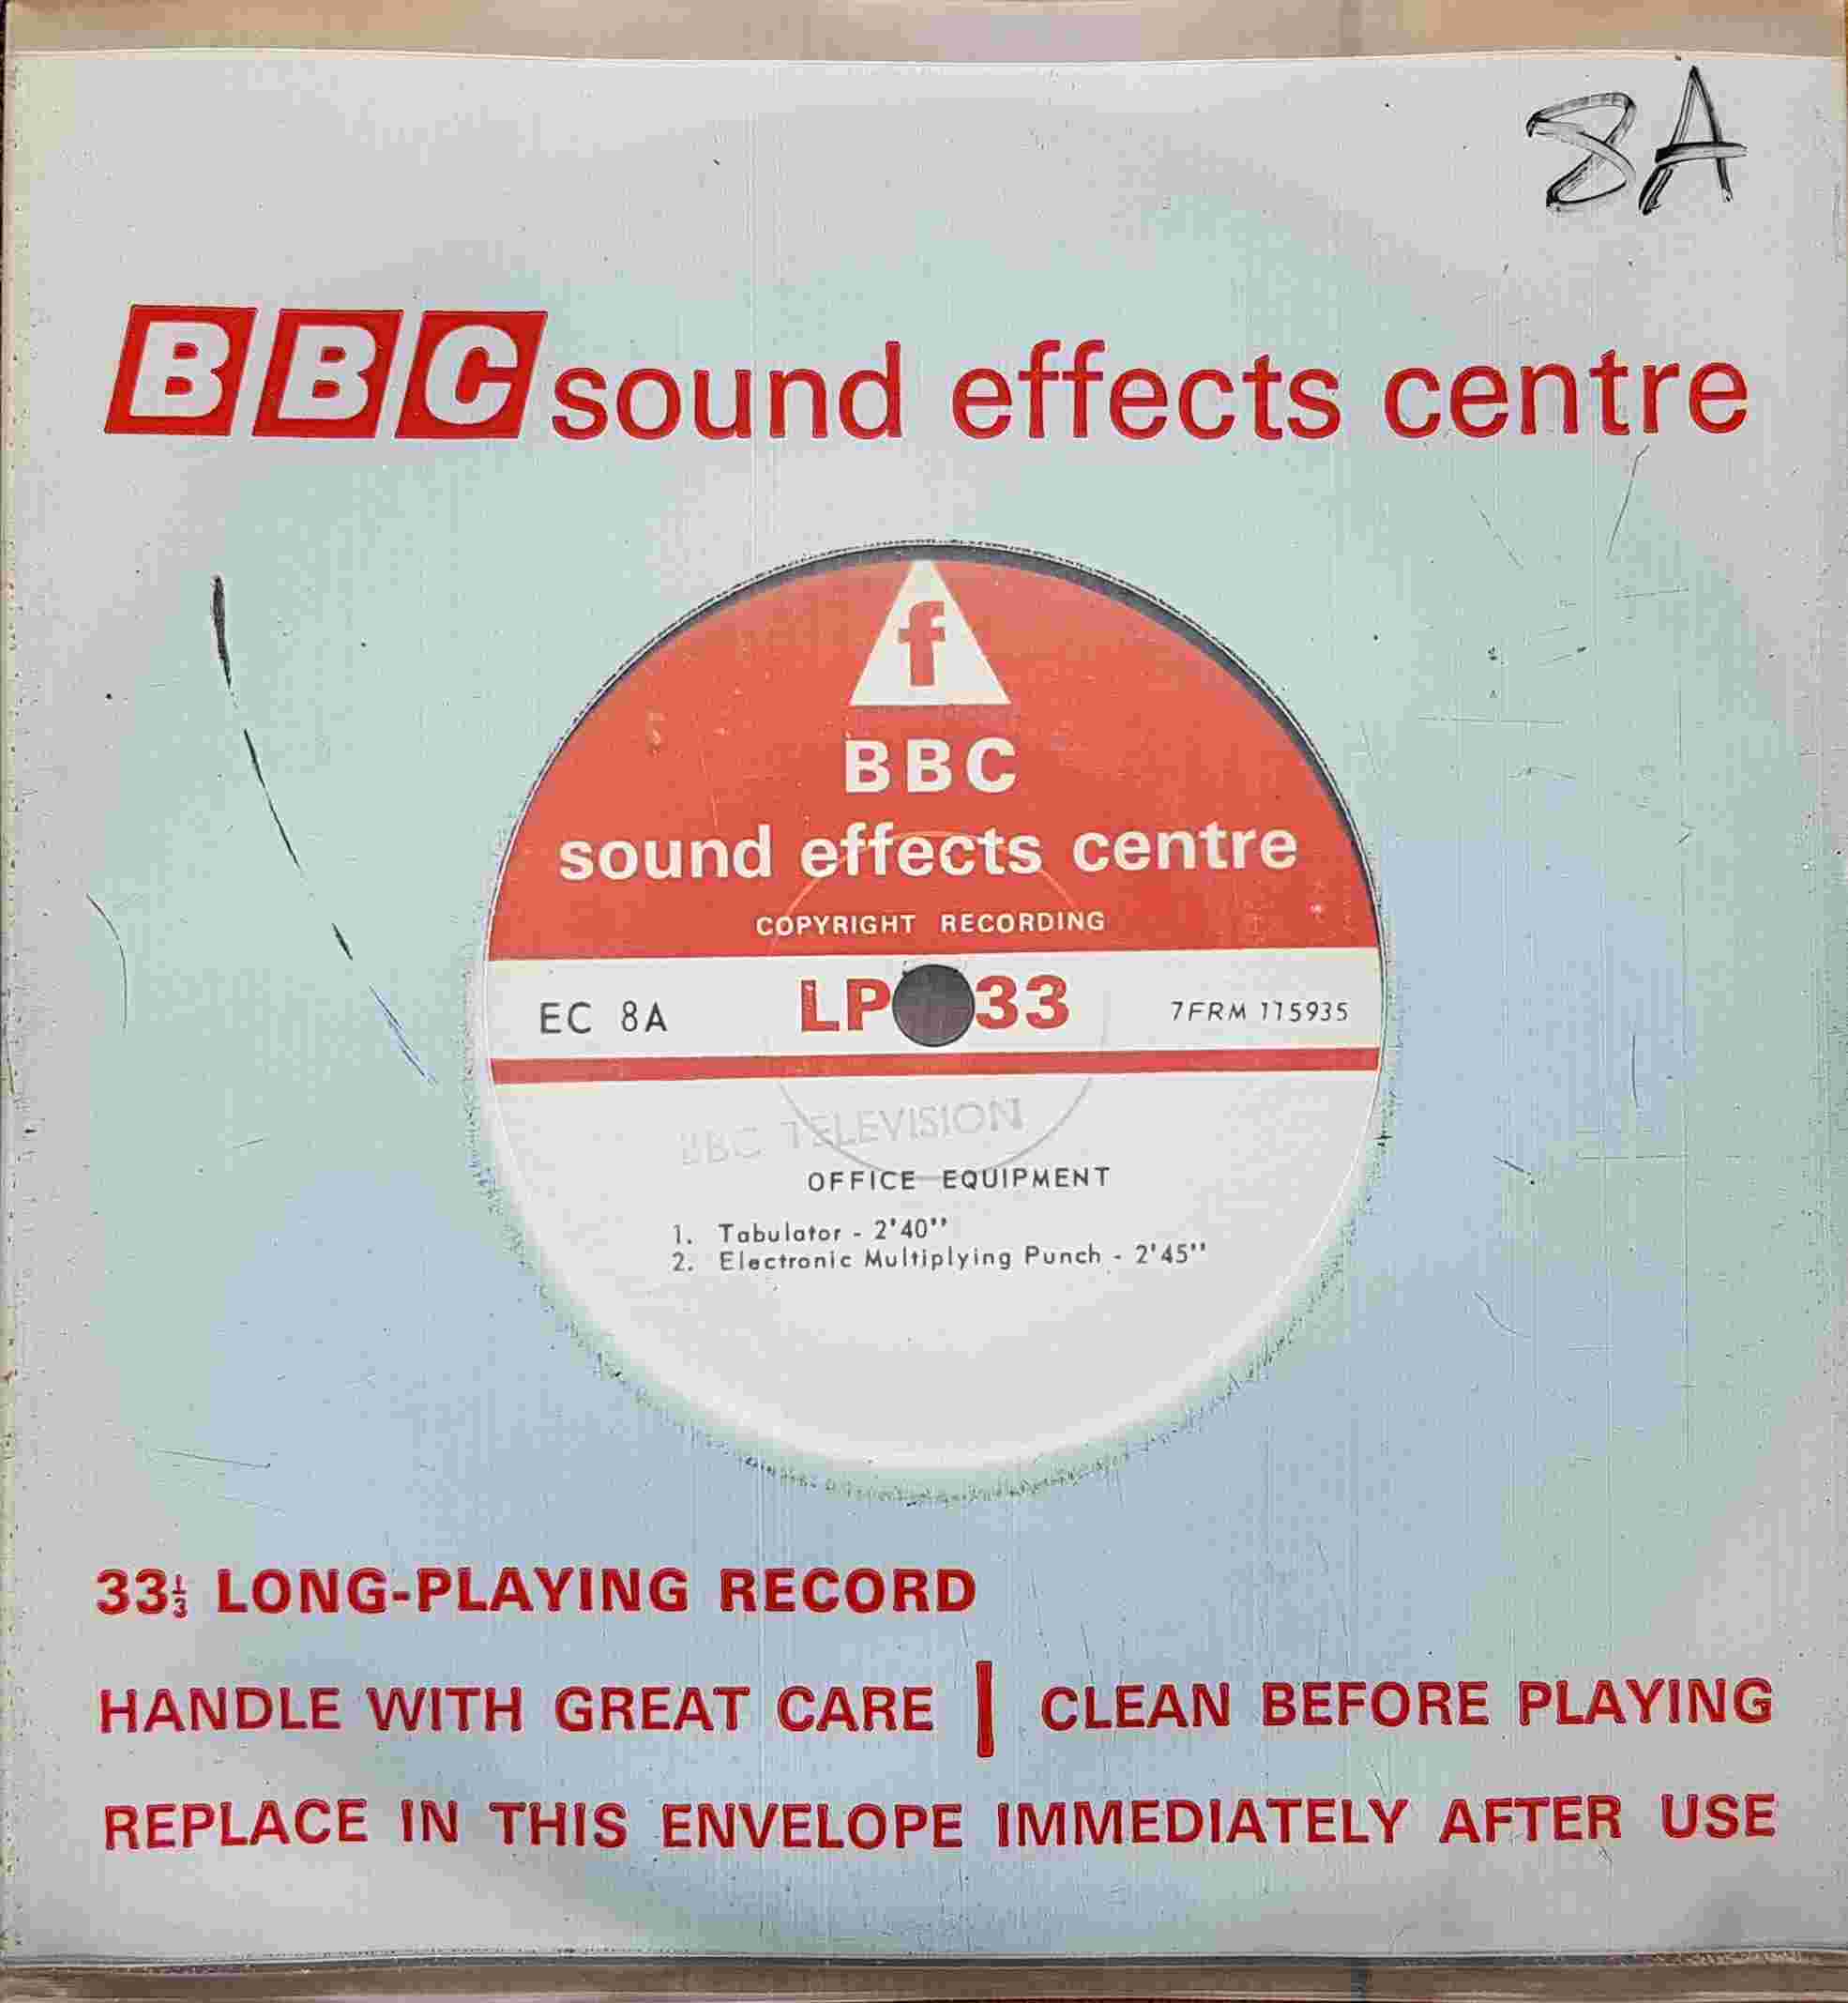 Picture of EC 8A Office equipment by artist Not registered from the BBC singles - Records and Tapes library